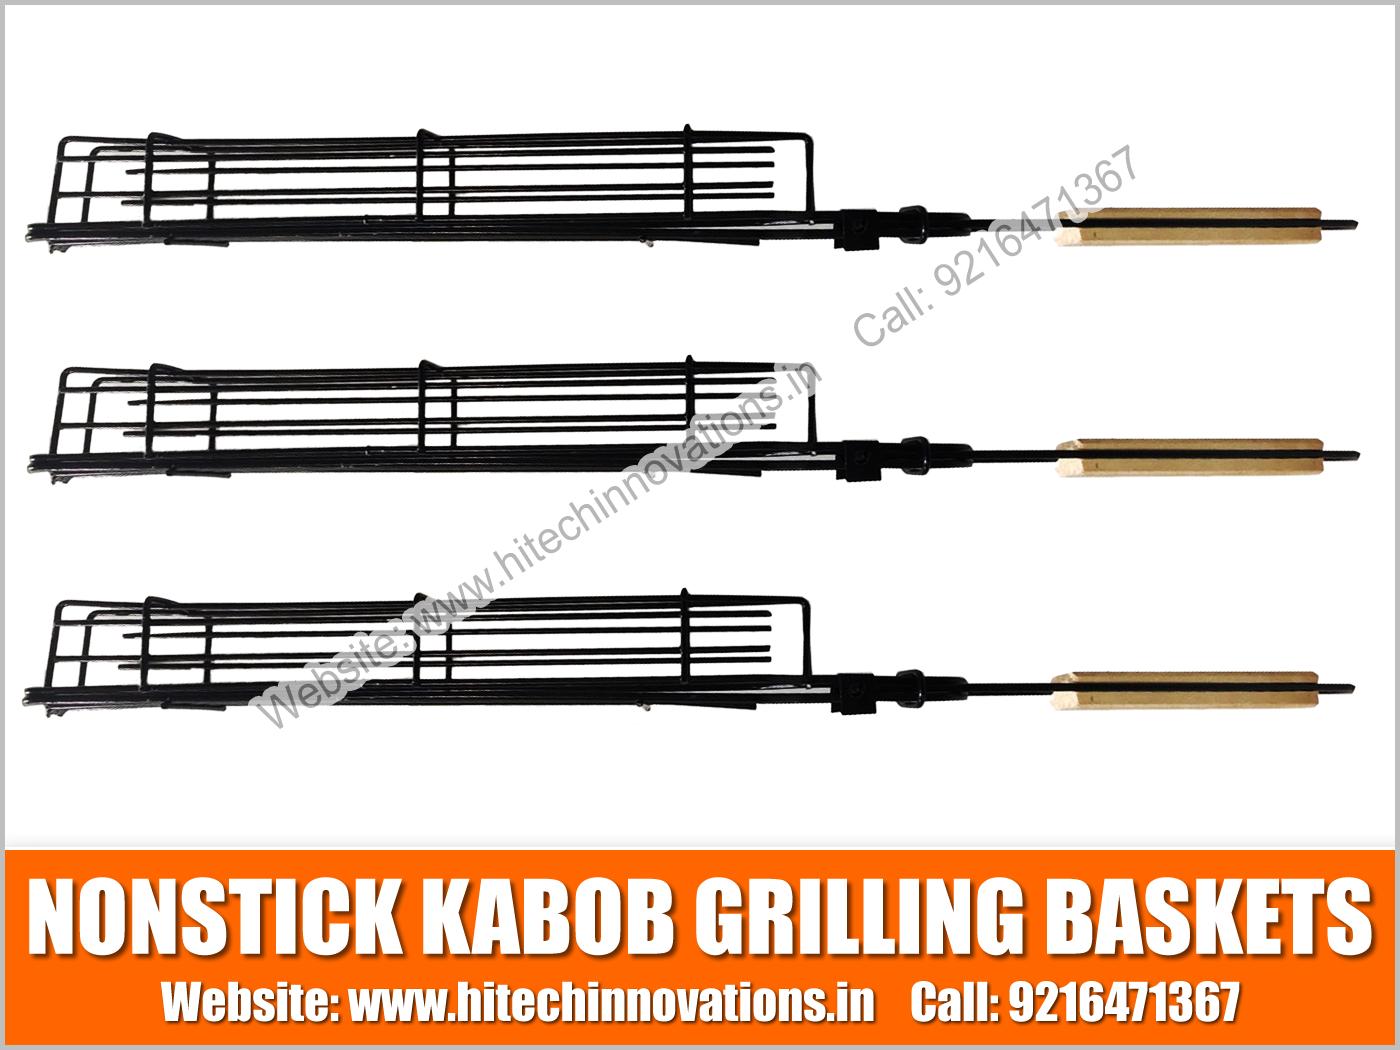 Ready Kabob Baskets for Grilling